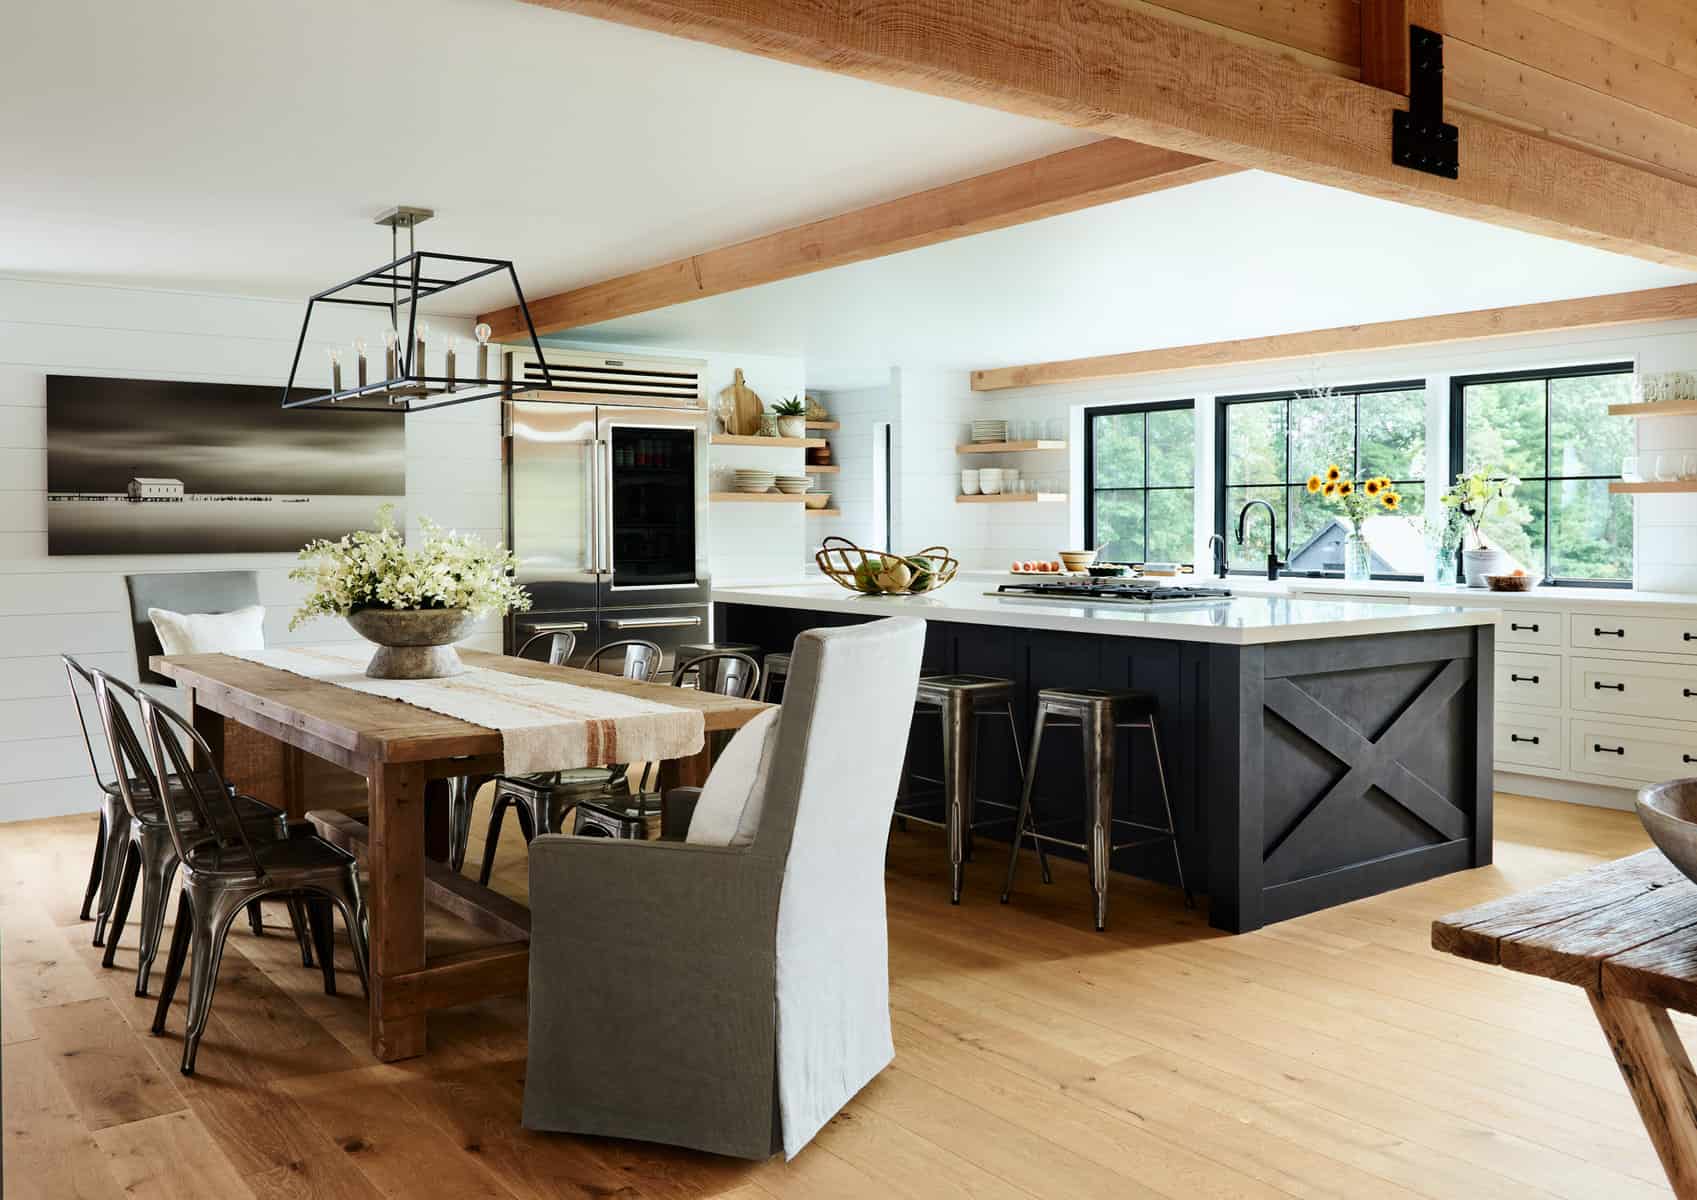 The kitchen island has a unique finish of black suede paint, playing off the metal joinery on the timbers.Decorative ceiling timbers were added, carrying the idea of the living room timber frame to this space.